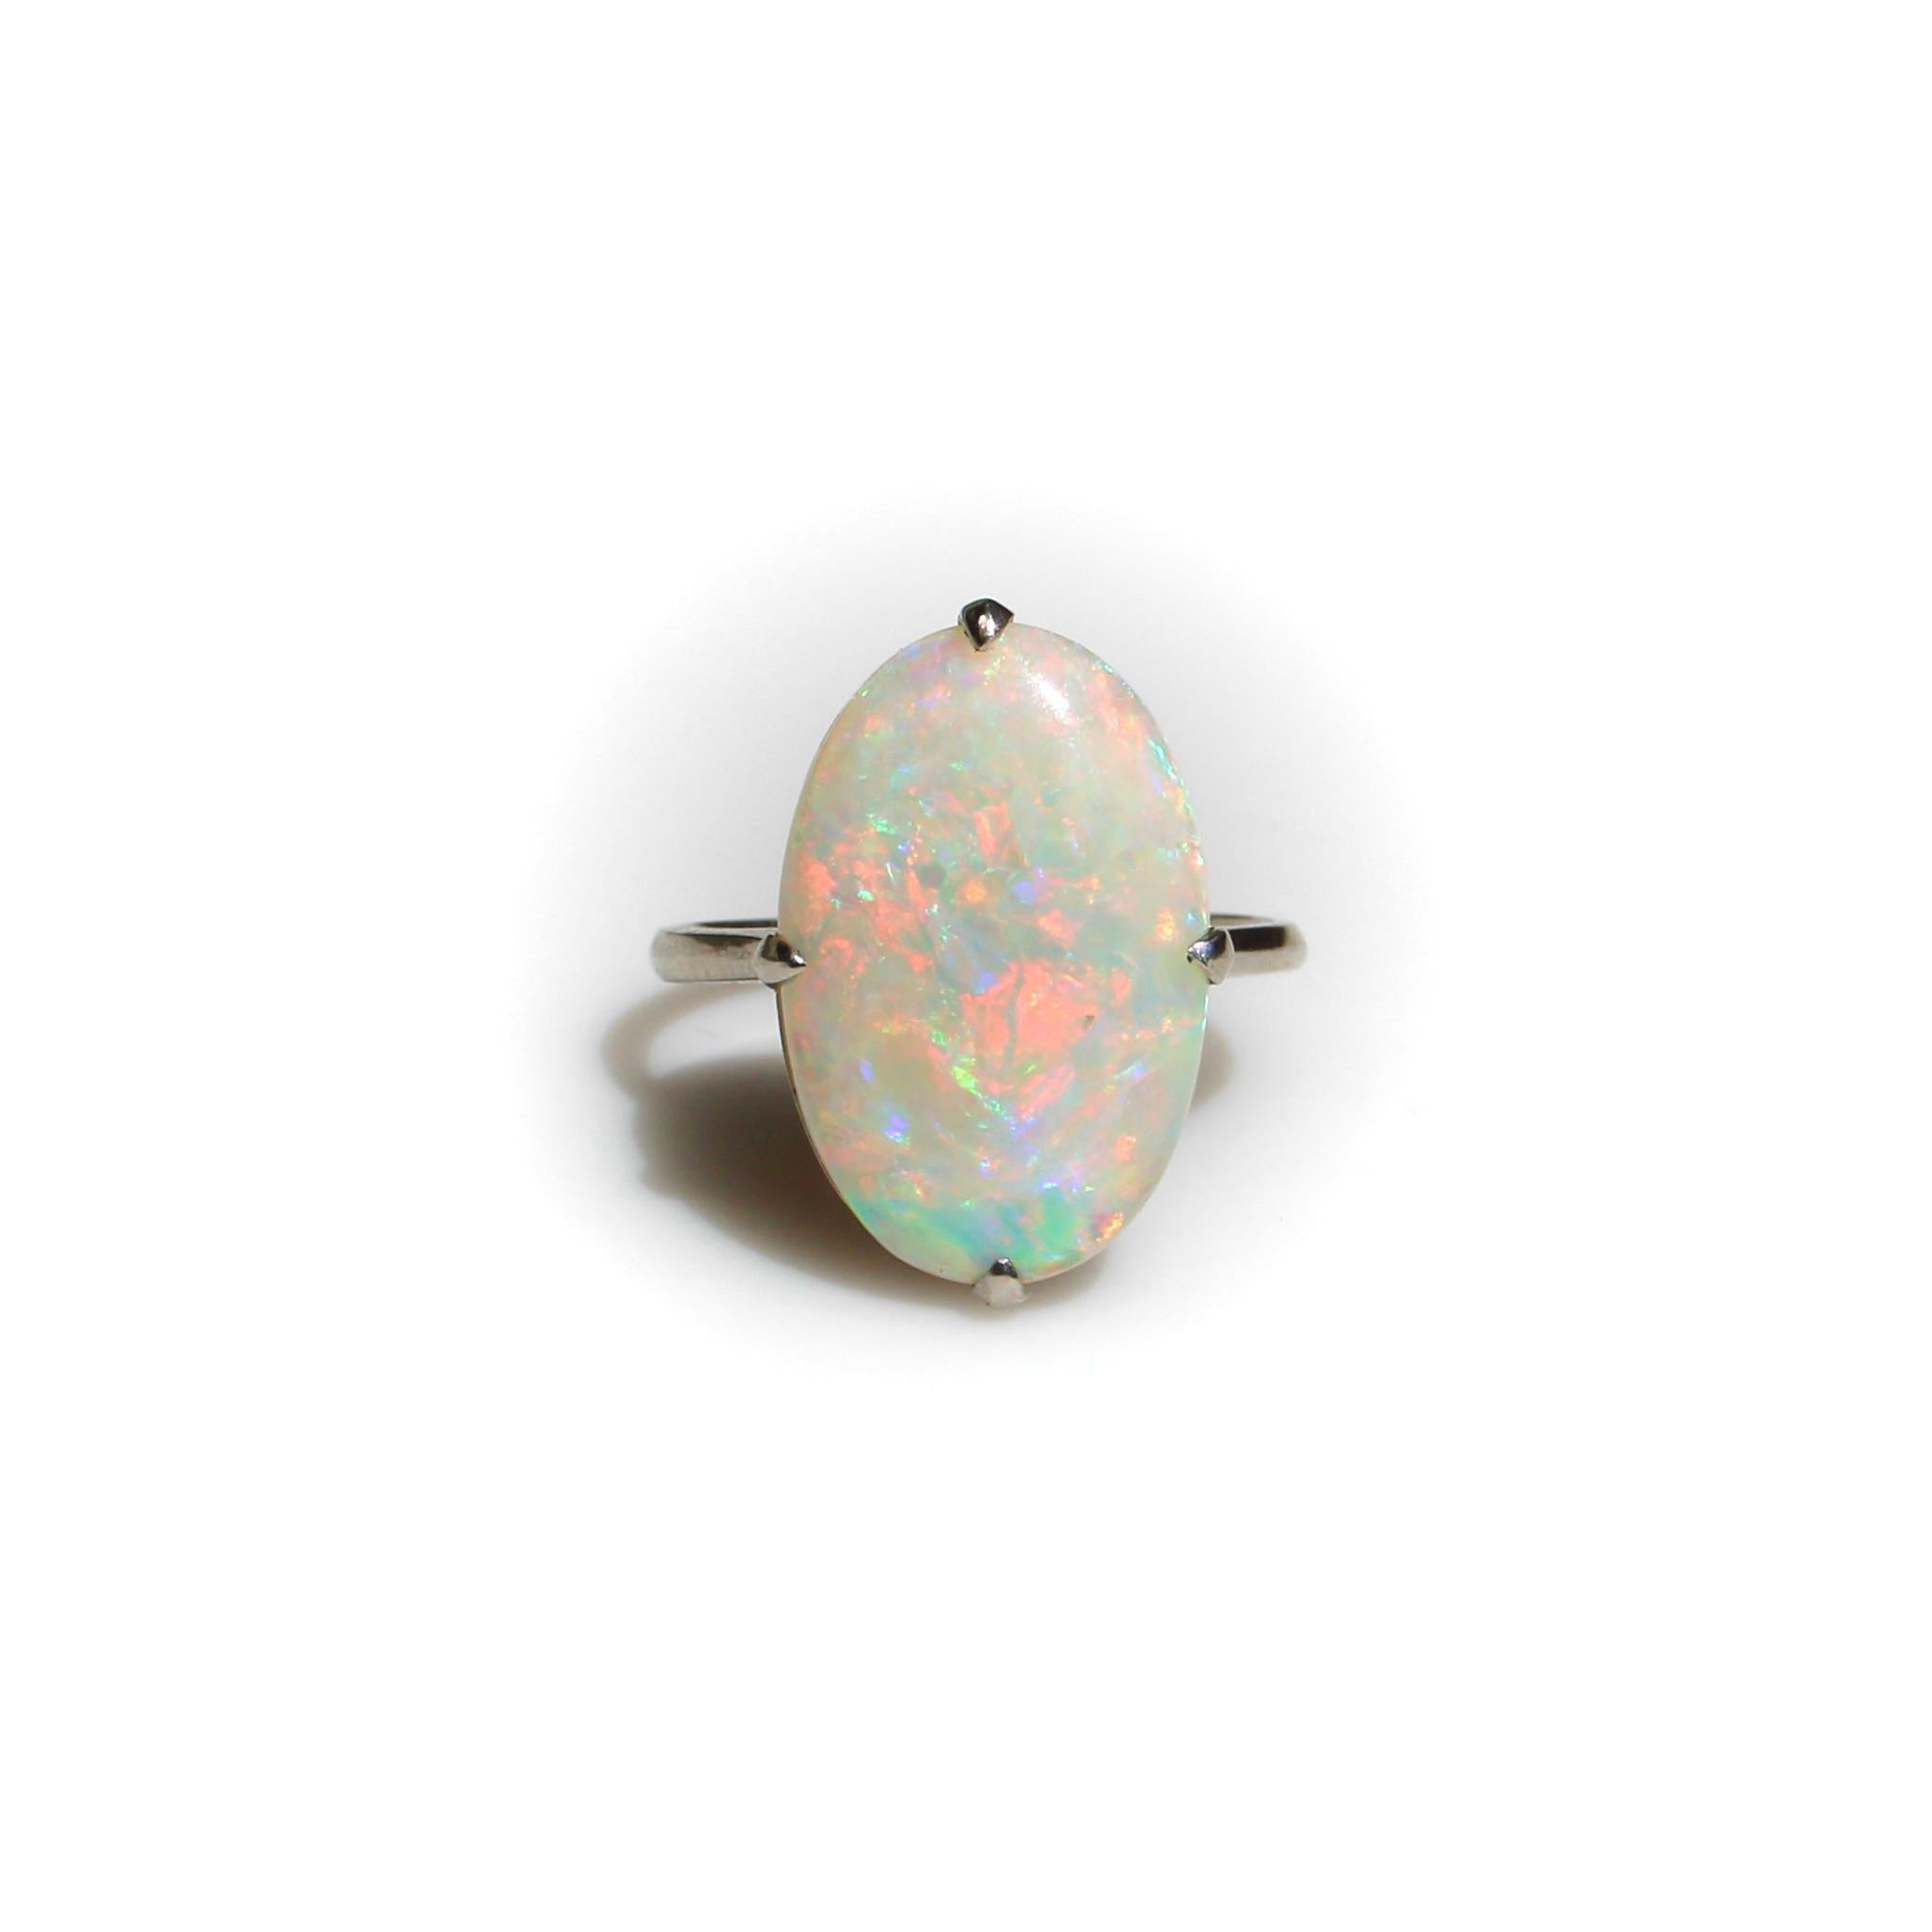 The standout features of this Art Deco ring are the beautiful Australian opal cabochon and the simplistic yet refined handmade platinum mount. The opal has intense color play in every color of the rainbow—a myriad of oranges, pinks, greens, blues,